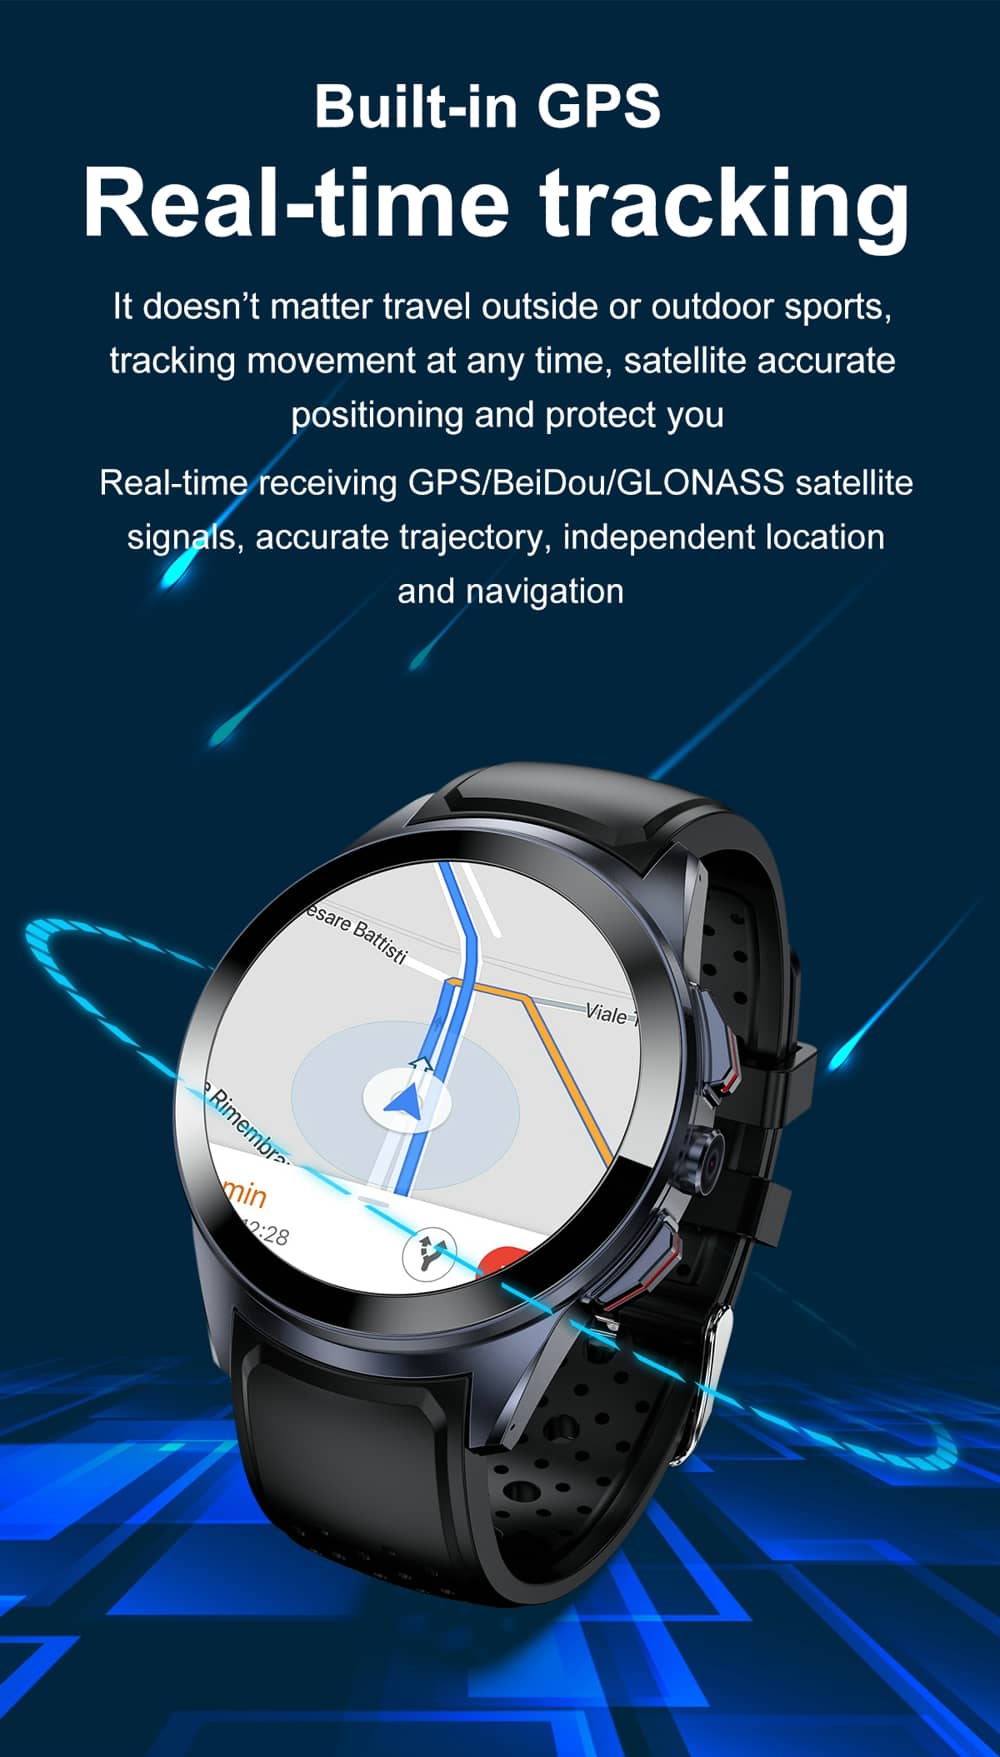 AMOLED 4G GPS Smart Watch Separate SIM Card HD Camera Blood Oxygen Heart Rate Monitor IP68 Waterproof Smart AI Assistant - Findtime